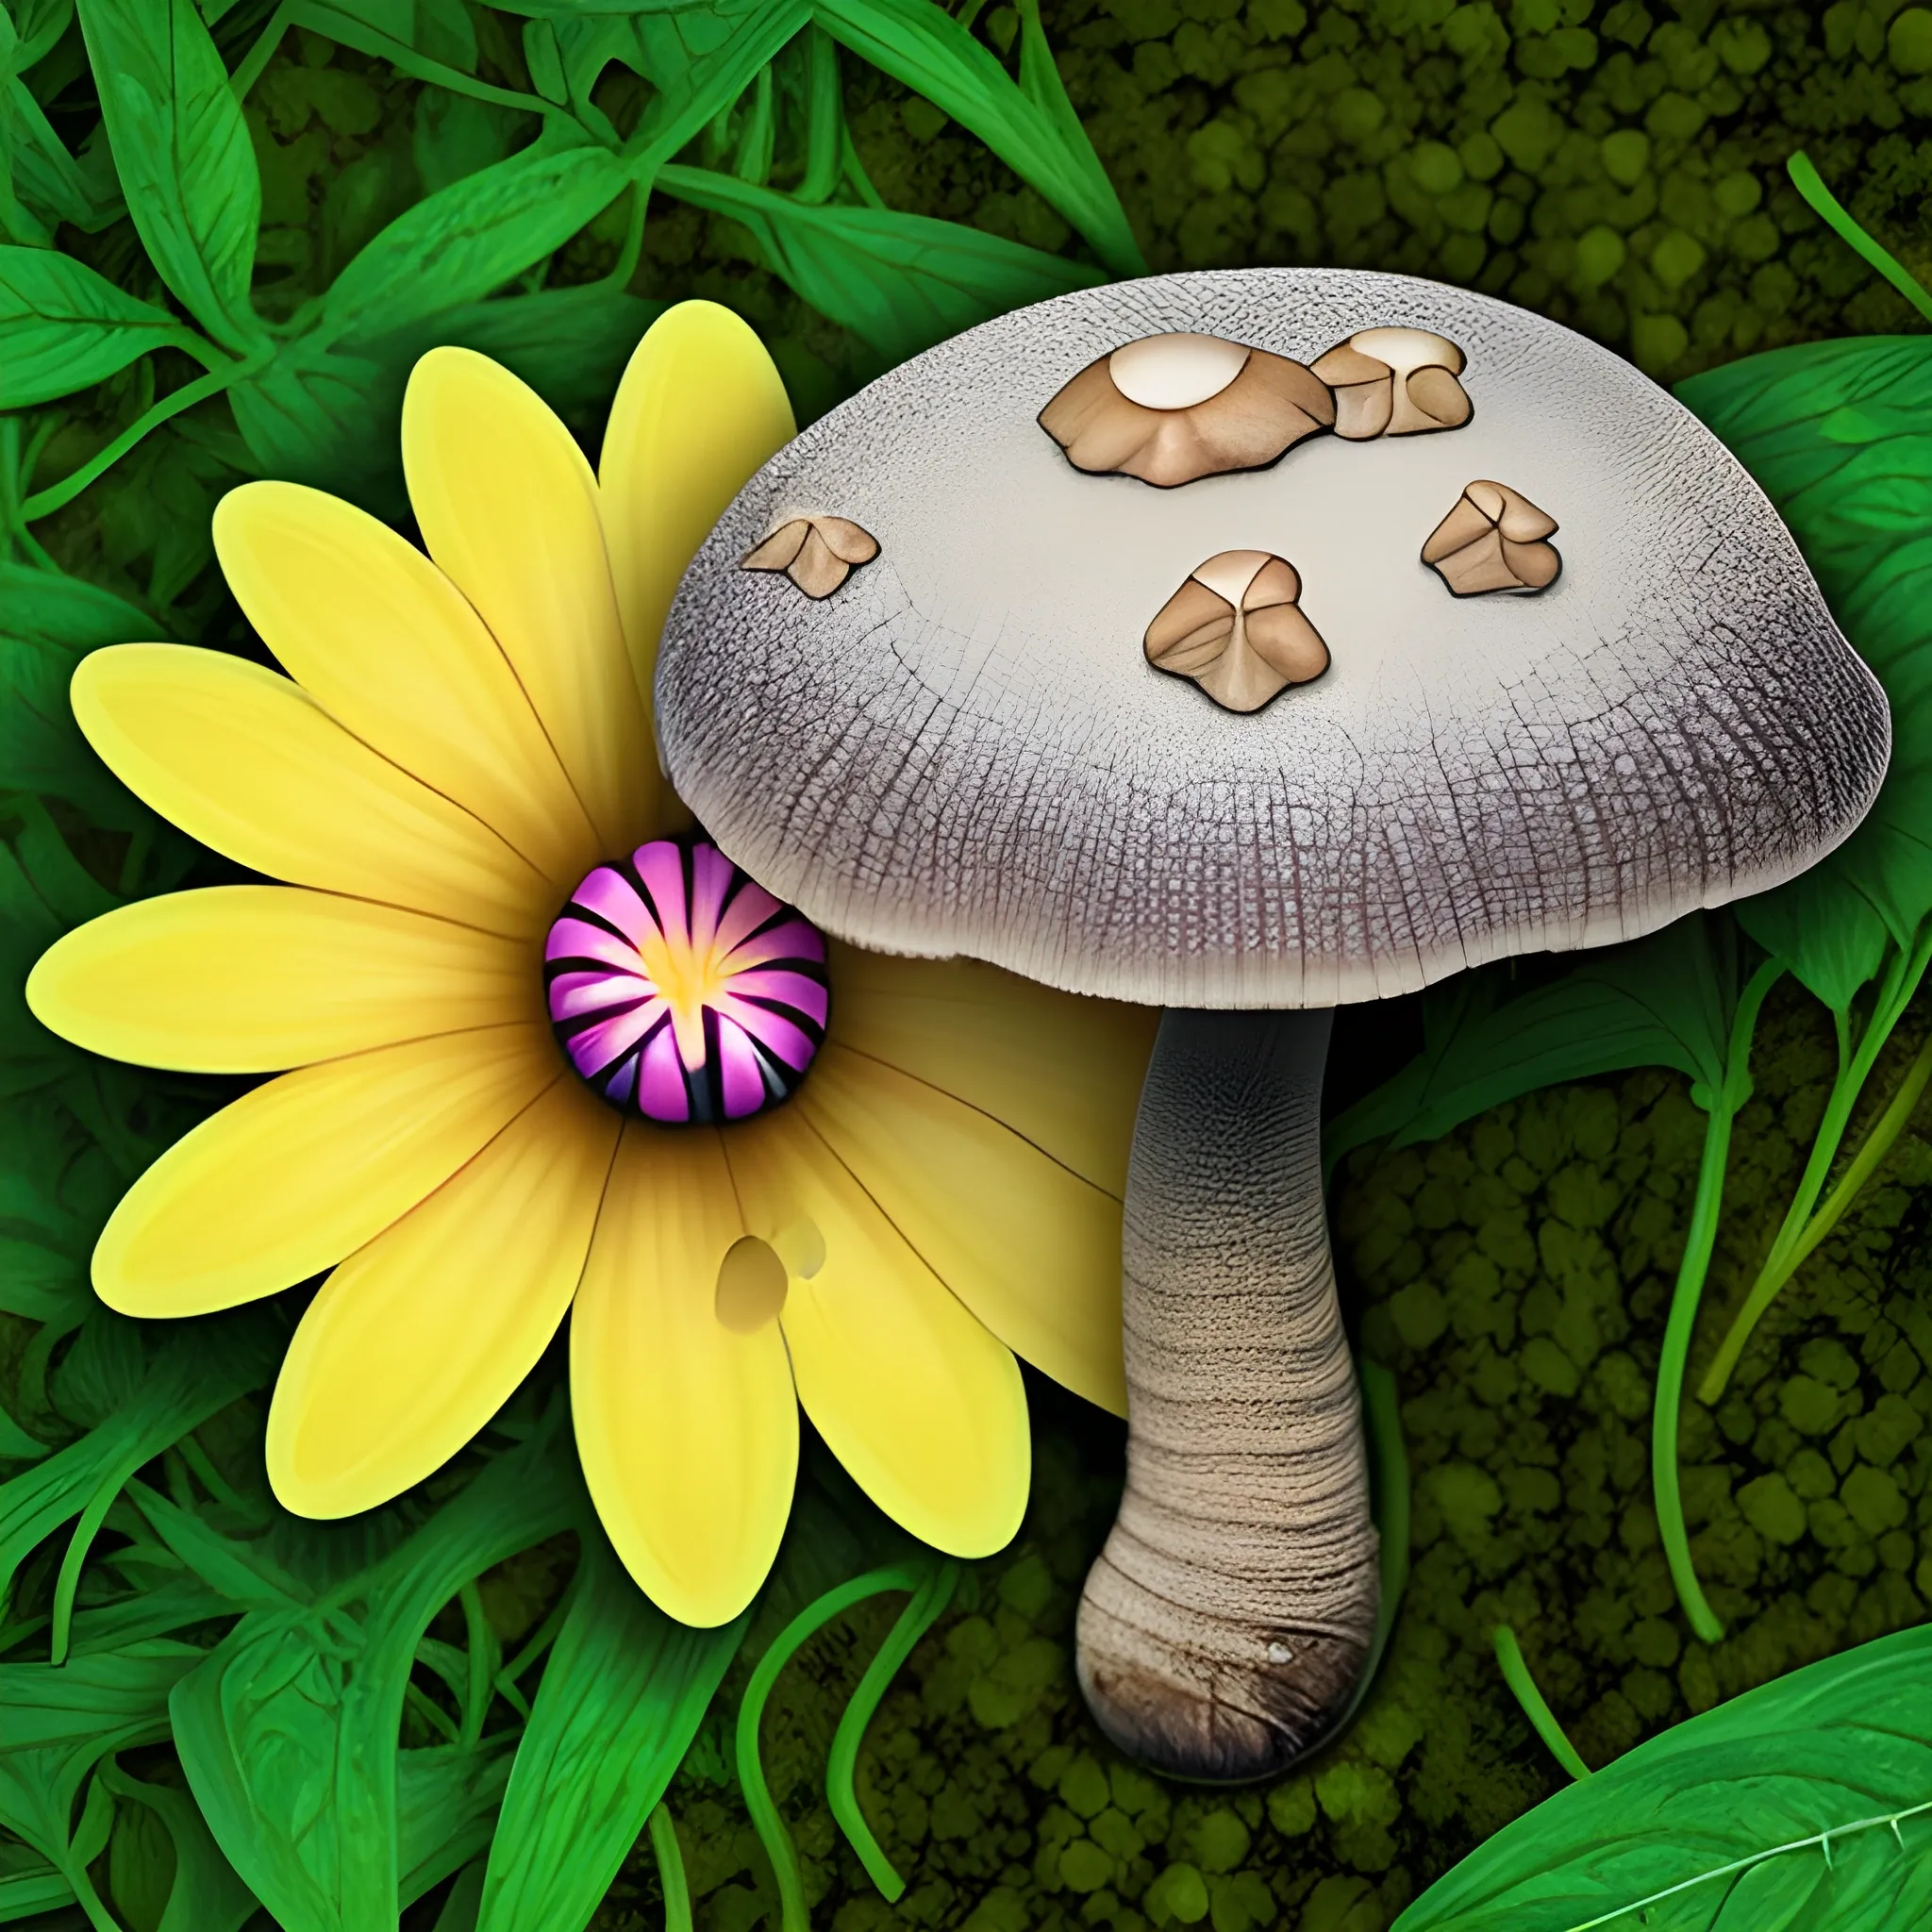 a buetiful flower with a fungus in the middle